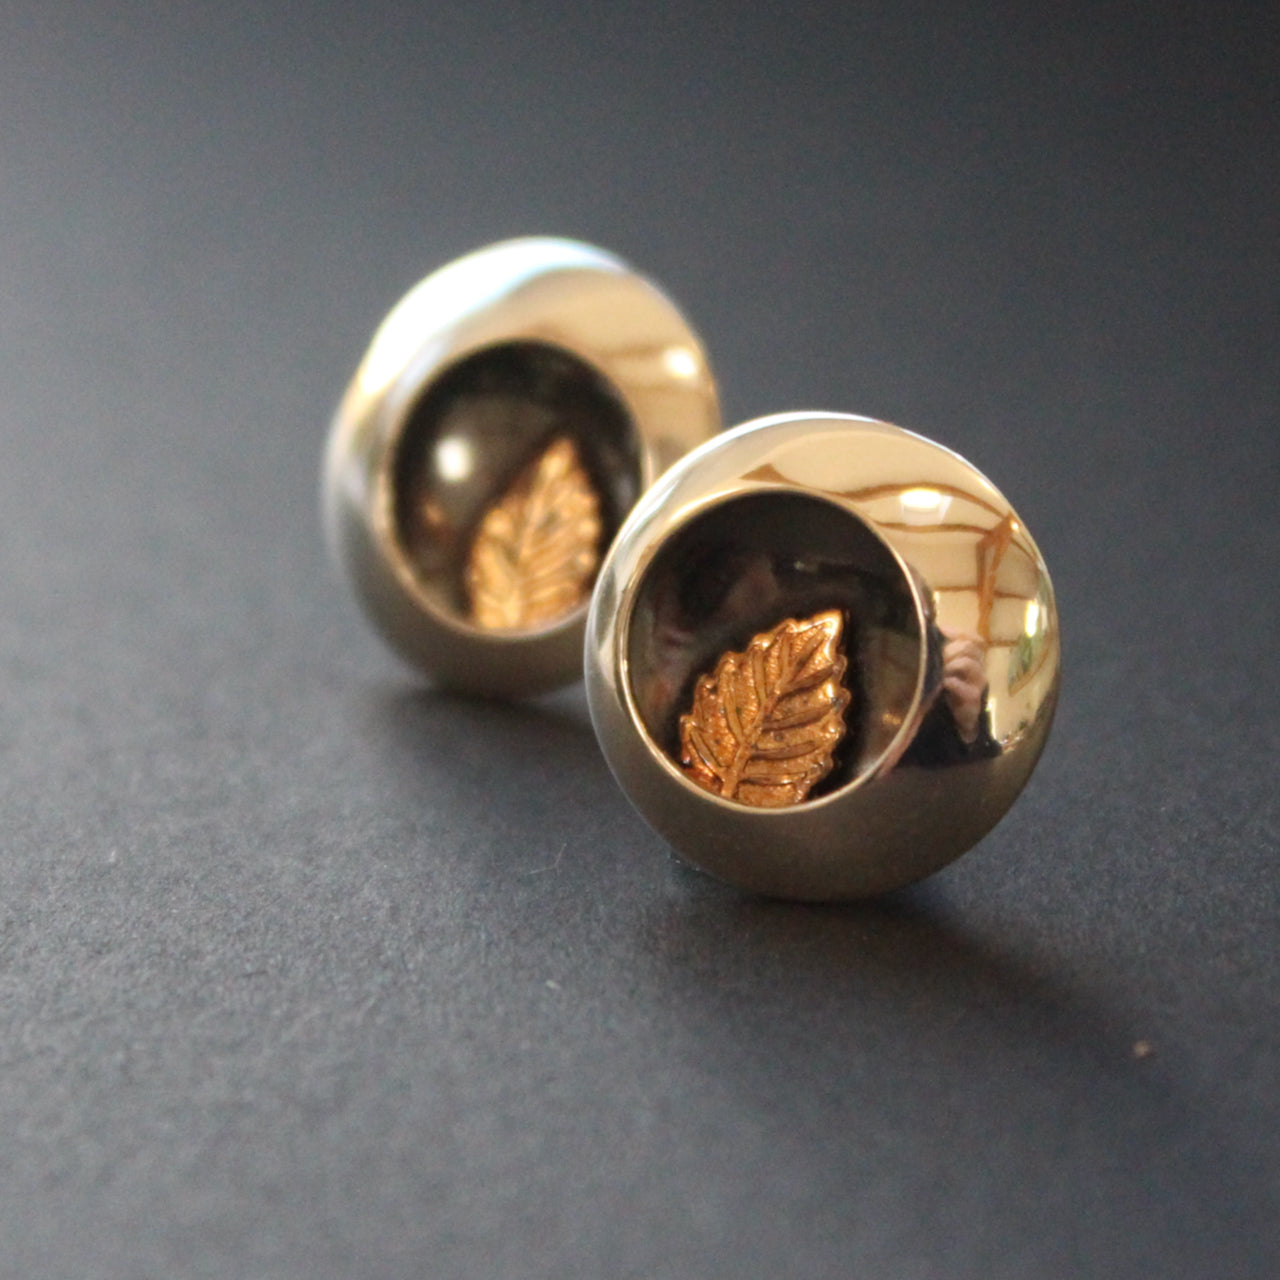 Round silver stud earrings with leaf inlay by UK artist Beverly Bartlett